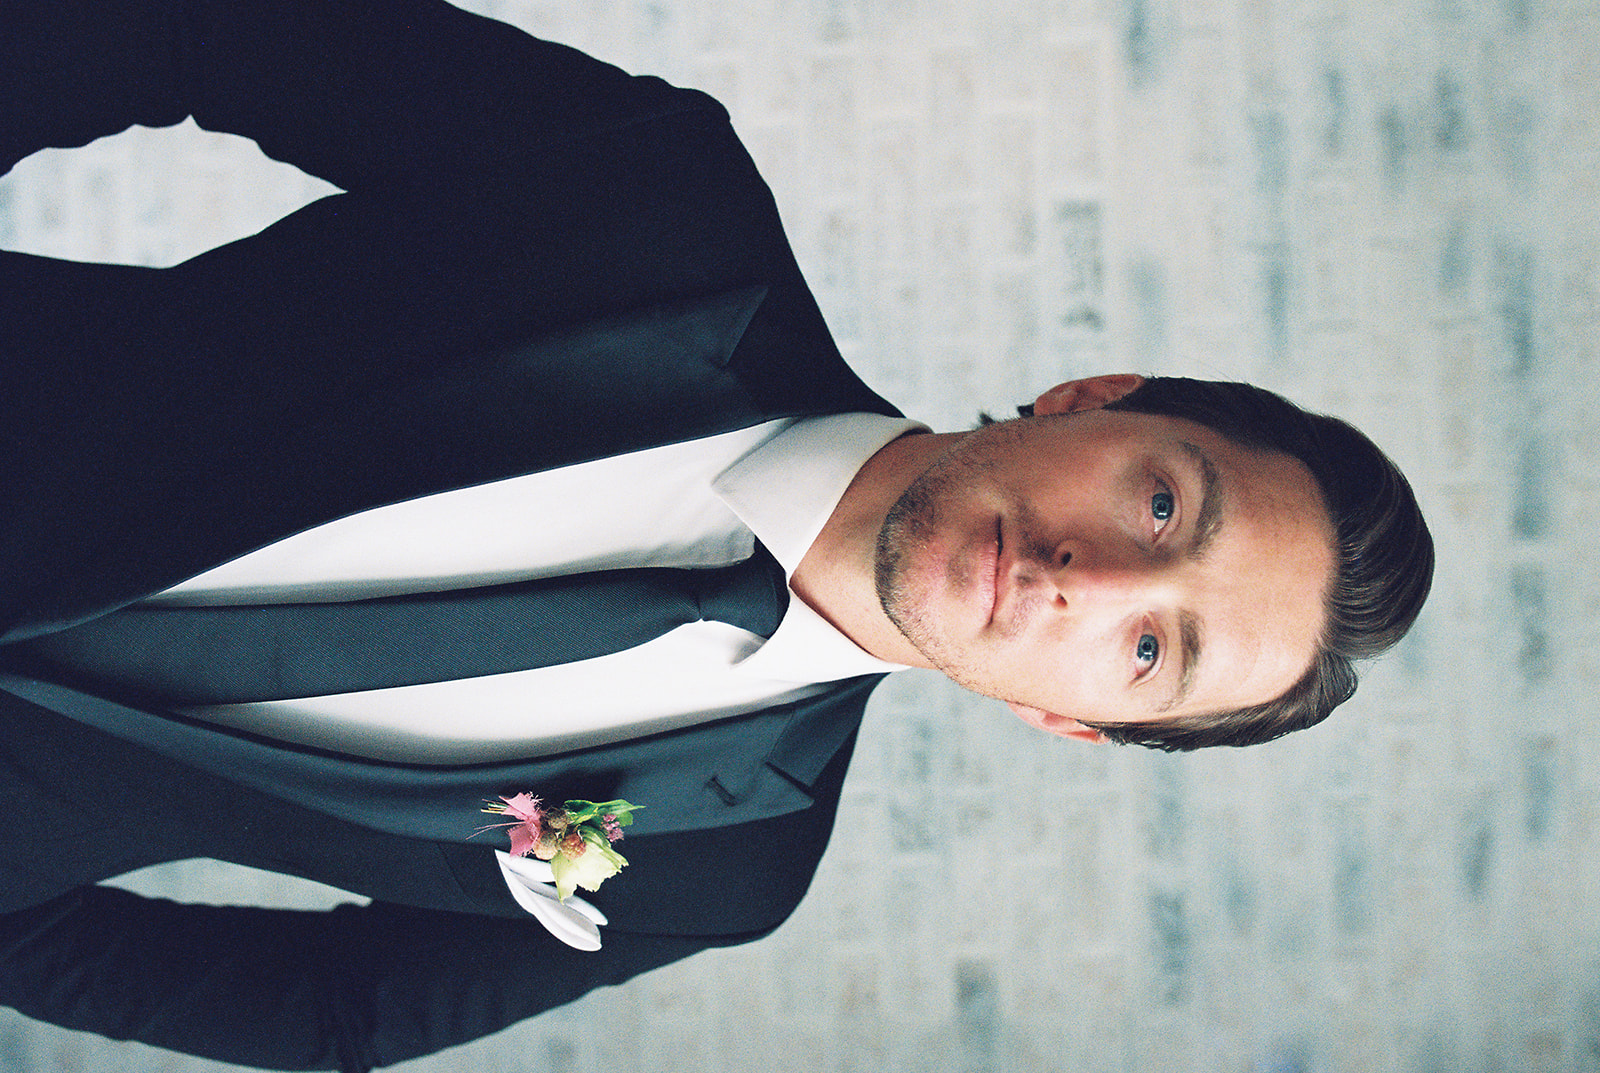 A wedding portrait of a groom in a designer black suit featuring a fresh floral boutonniere on his jacket's lapel.